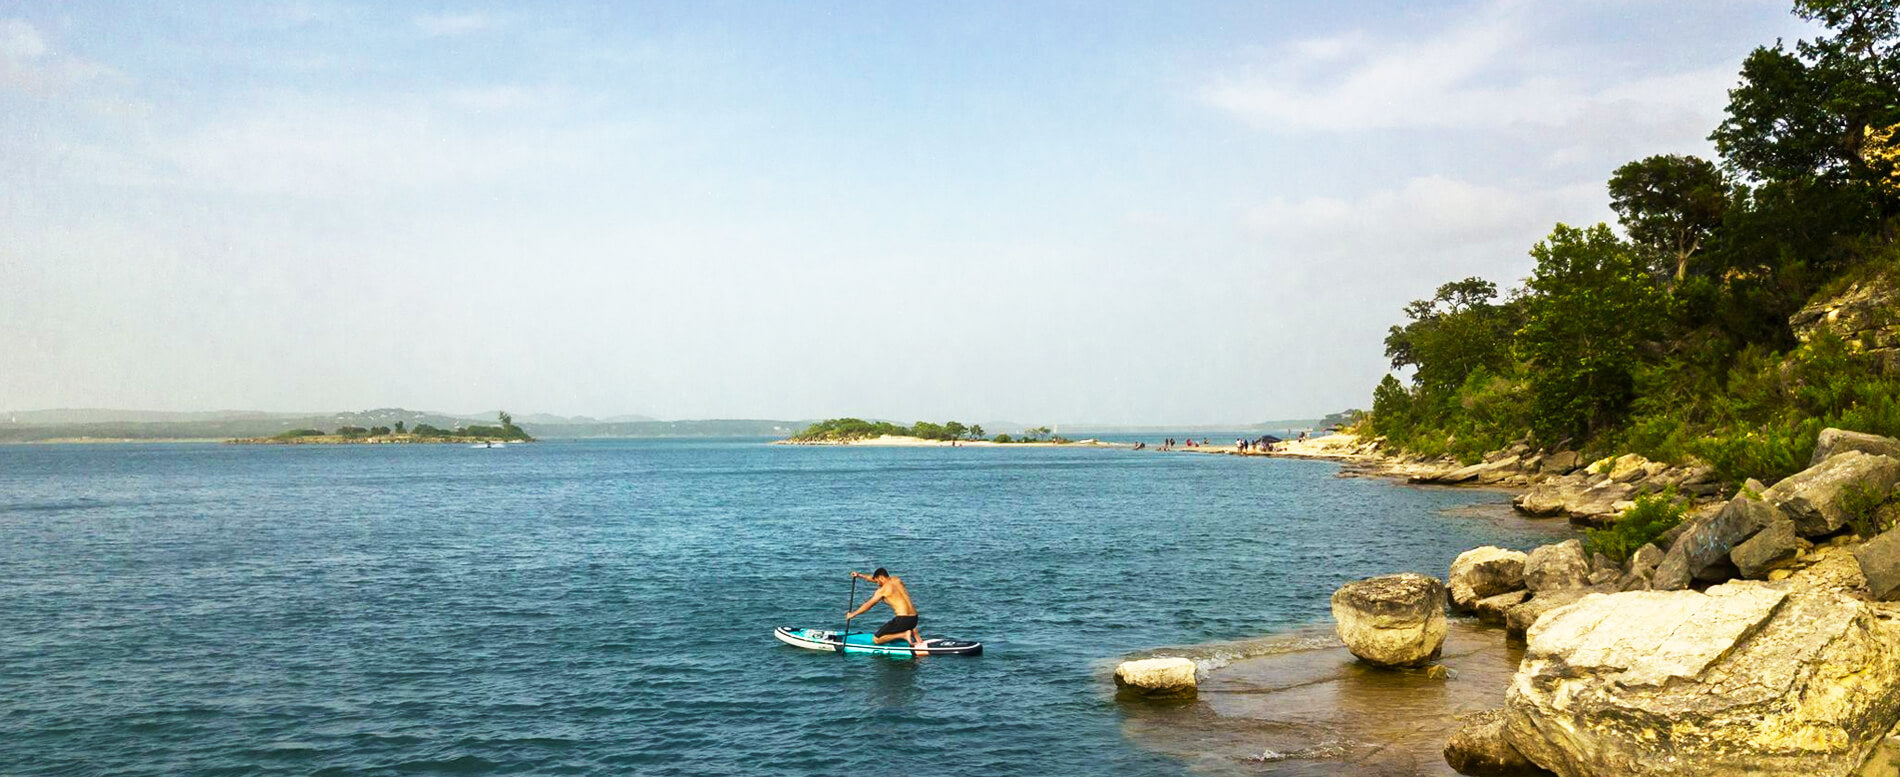 Man paddle boarding on the ocean